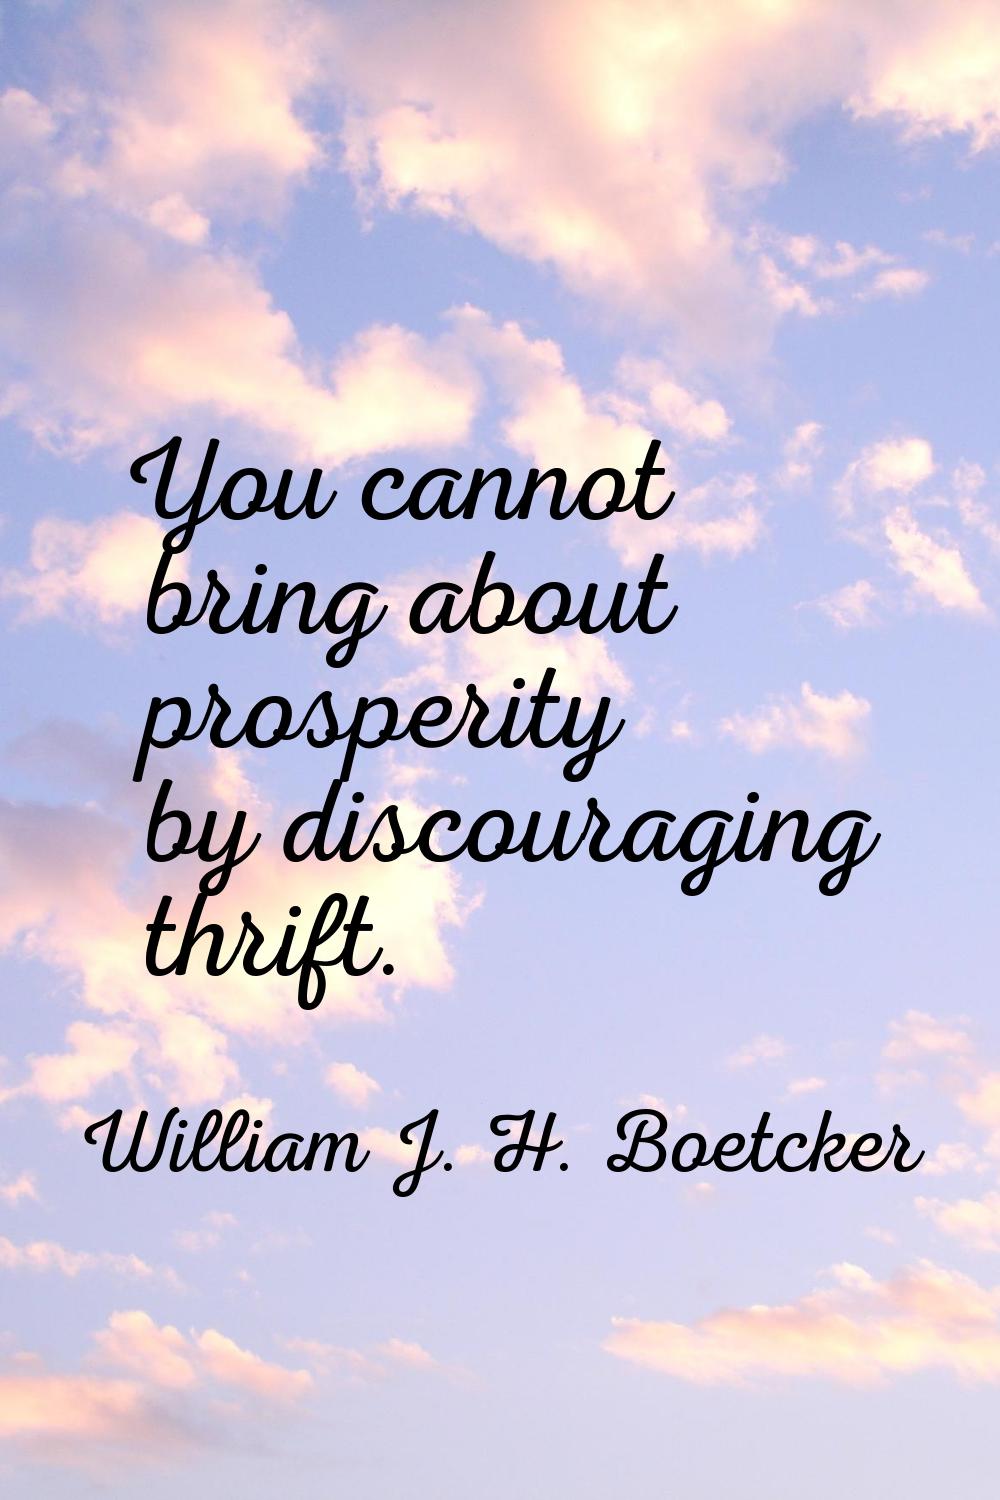 You cannot bring about prosperity by discouraging thrift.